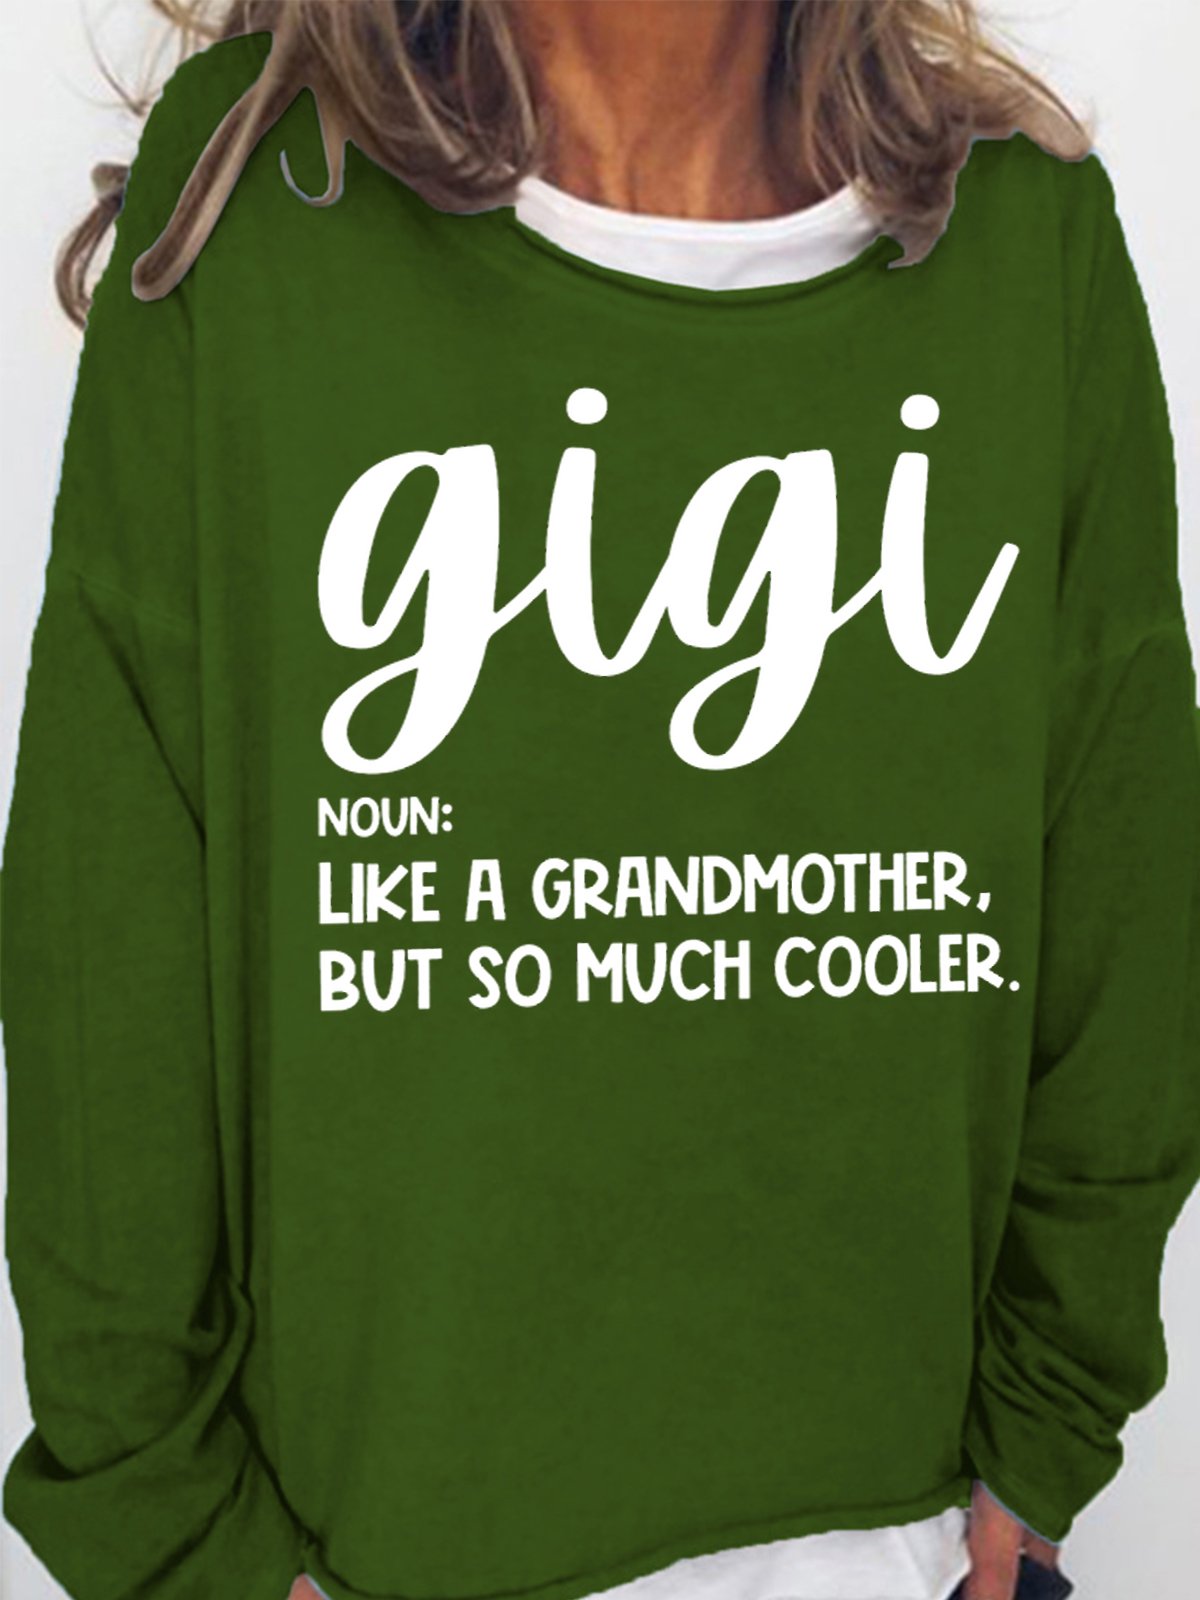 Women's Gigi Like A Grandmather But So Much Cooler Funny Graphic Printing Casual Text Letters Crew Neck Cotton-Blend Sweatshirt